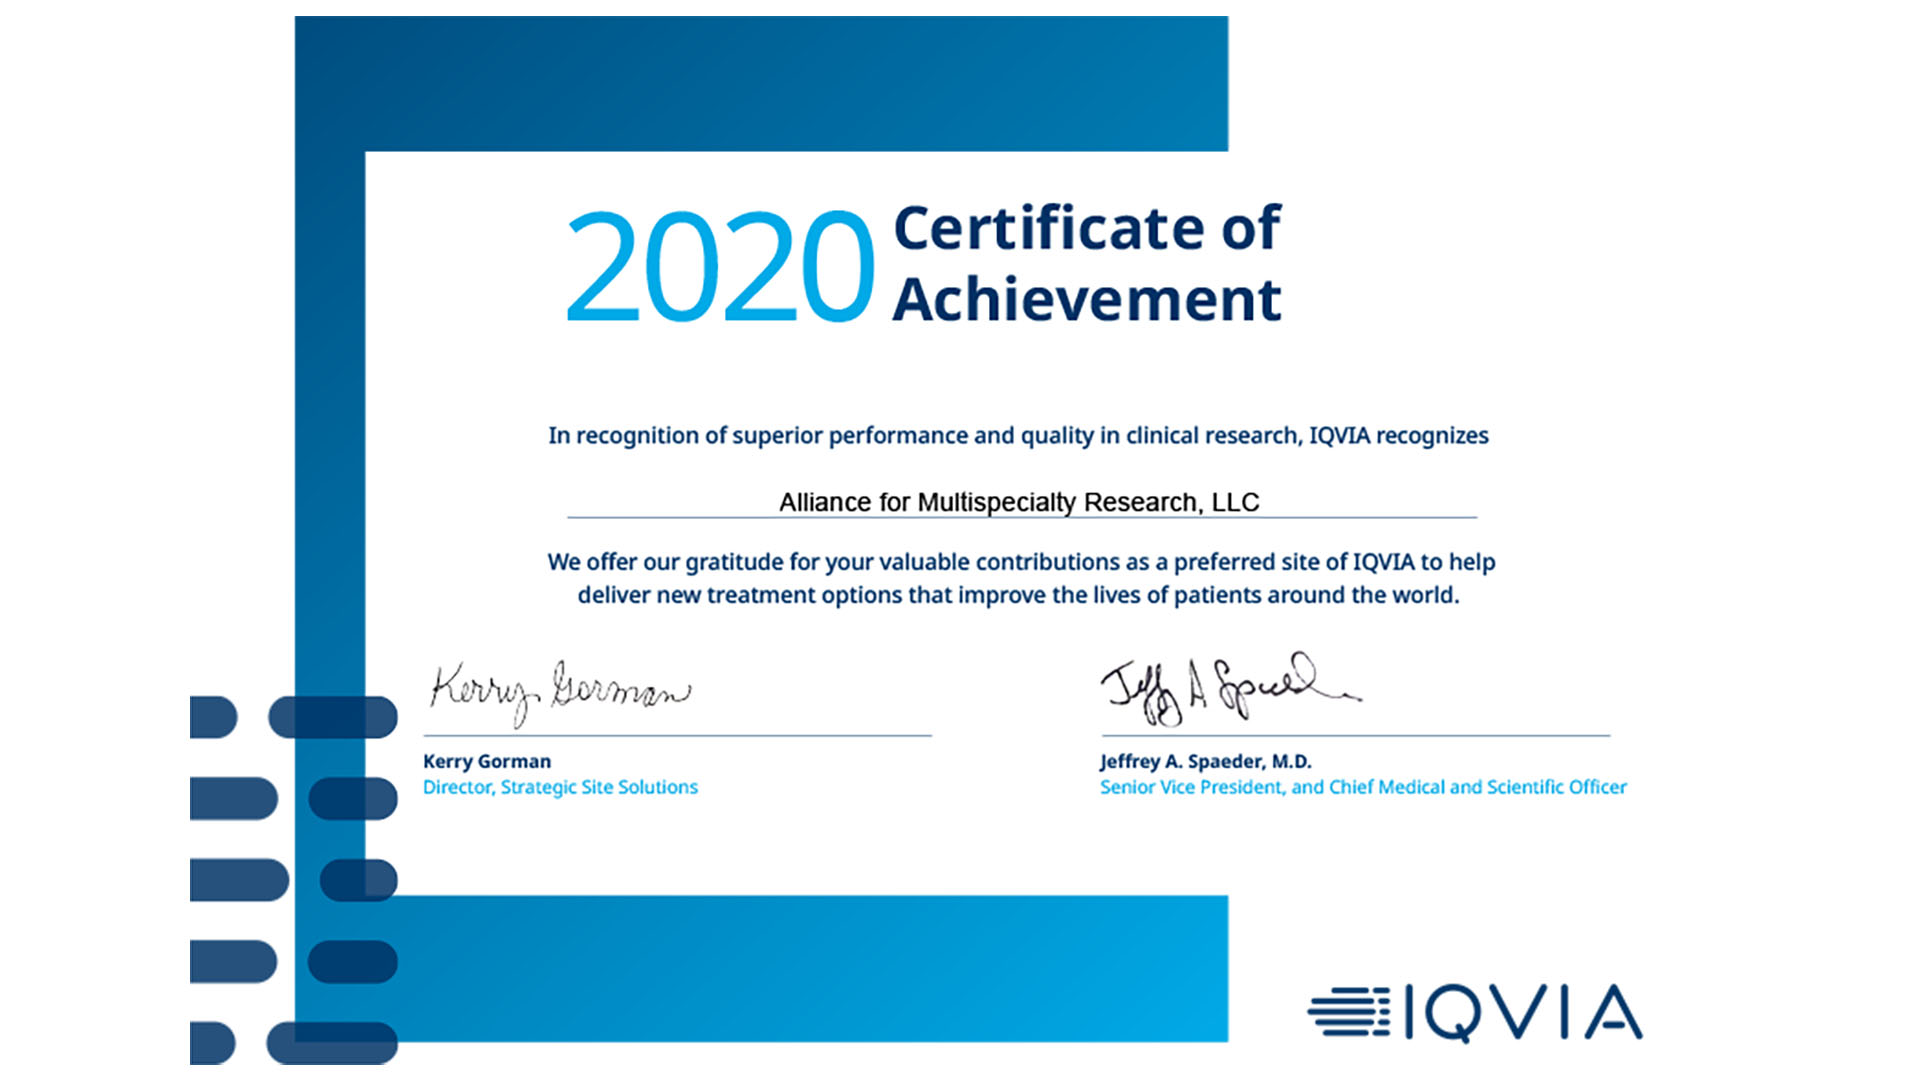 IQVIA Recognizes AMR for Top Performance